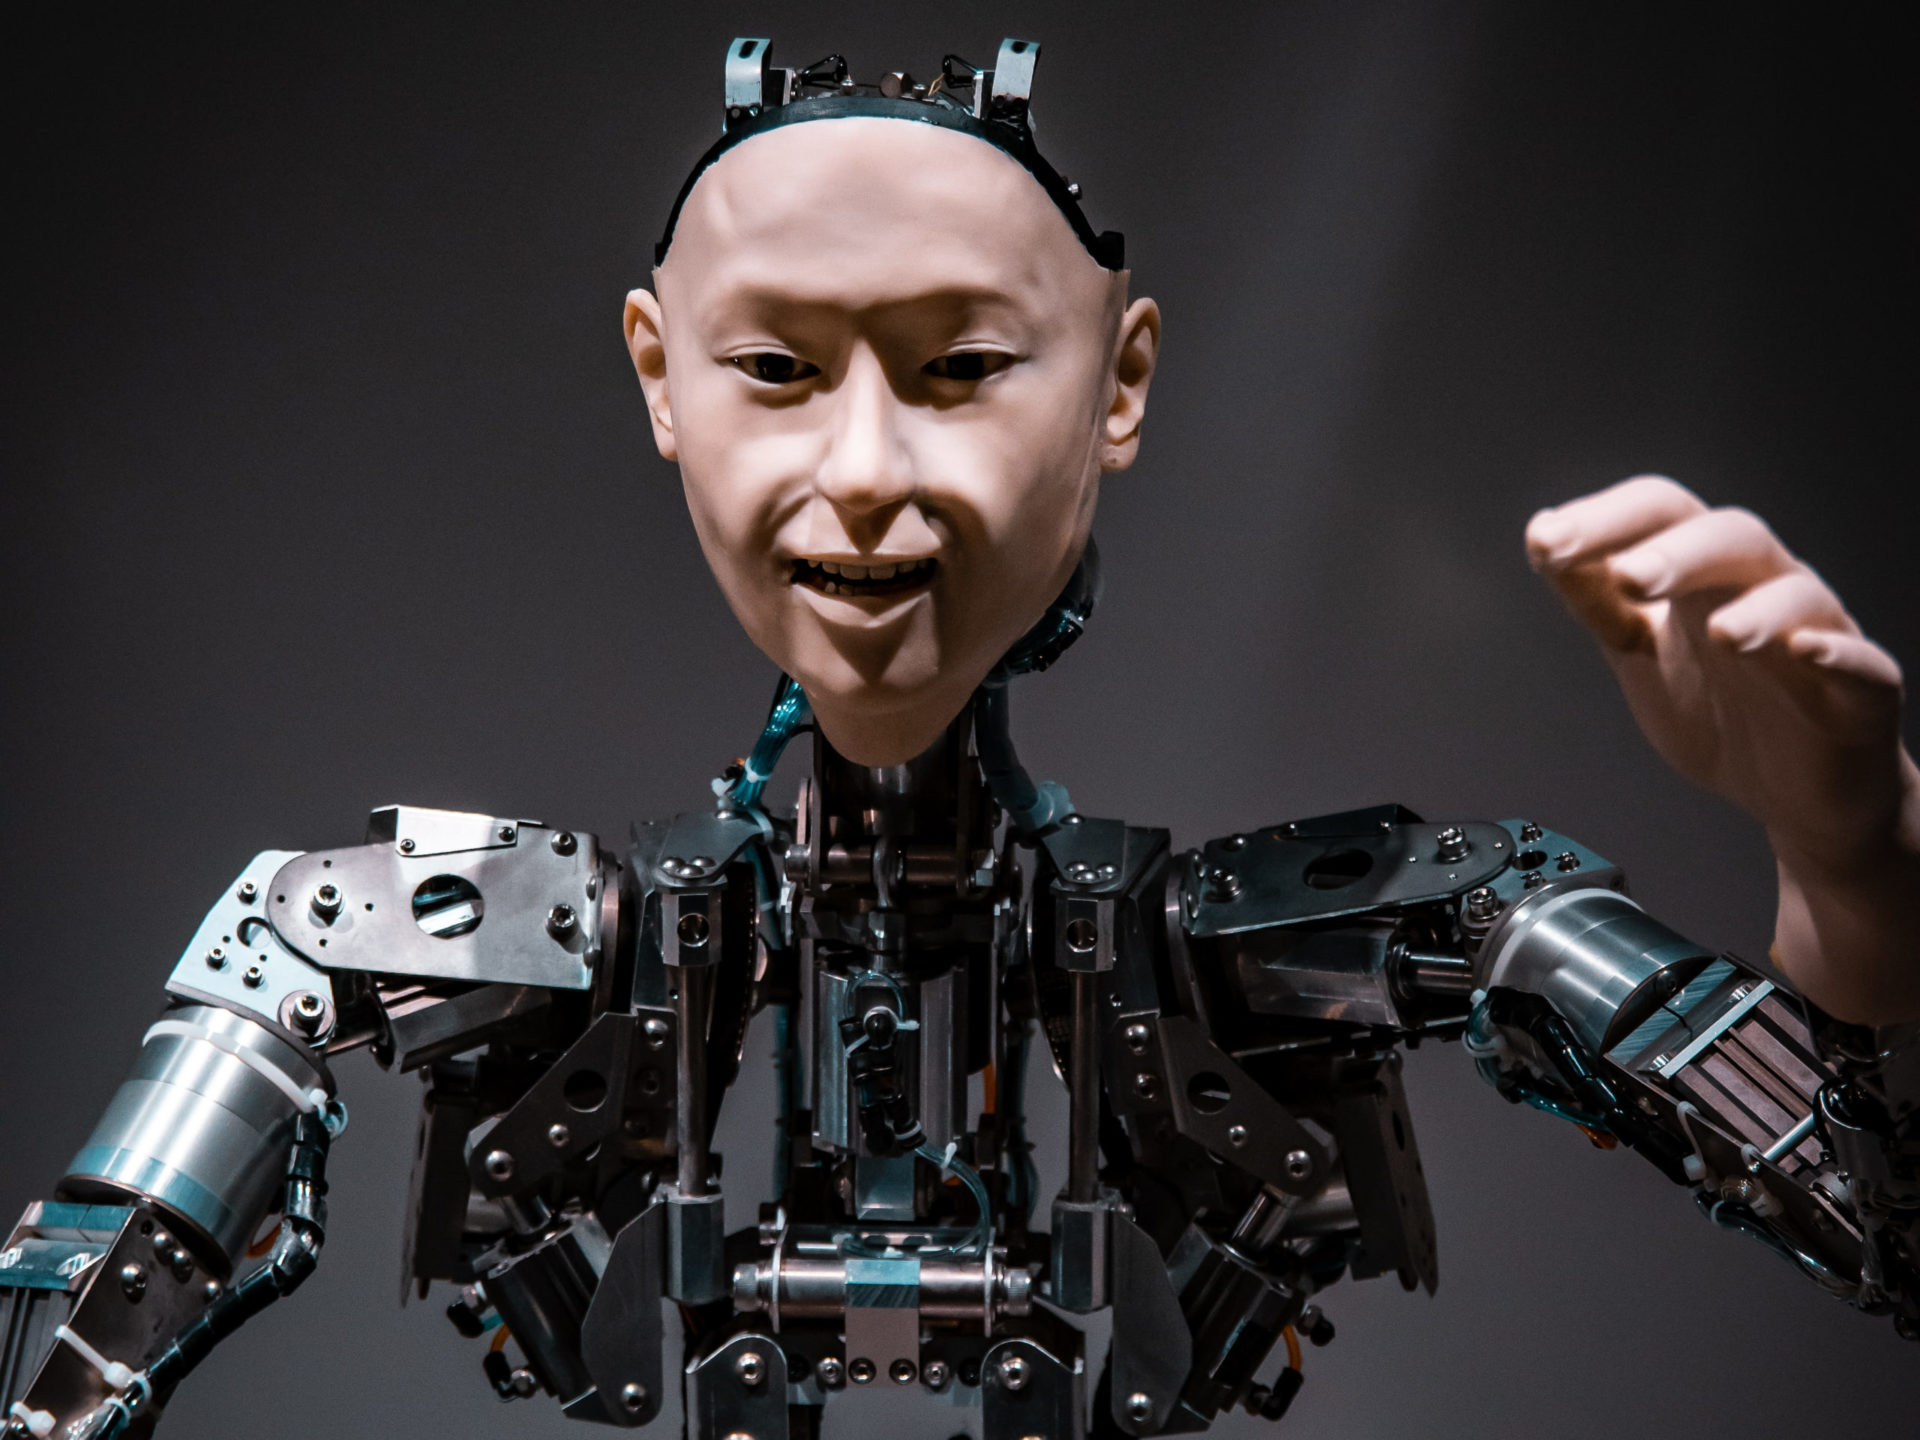 A human-like robot with realistic looking face and hands